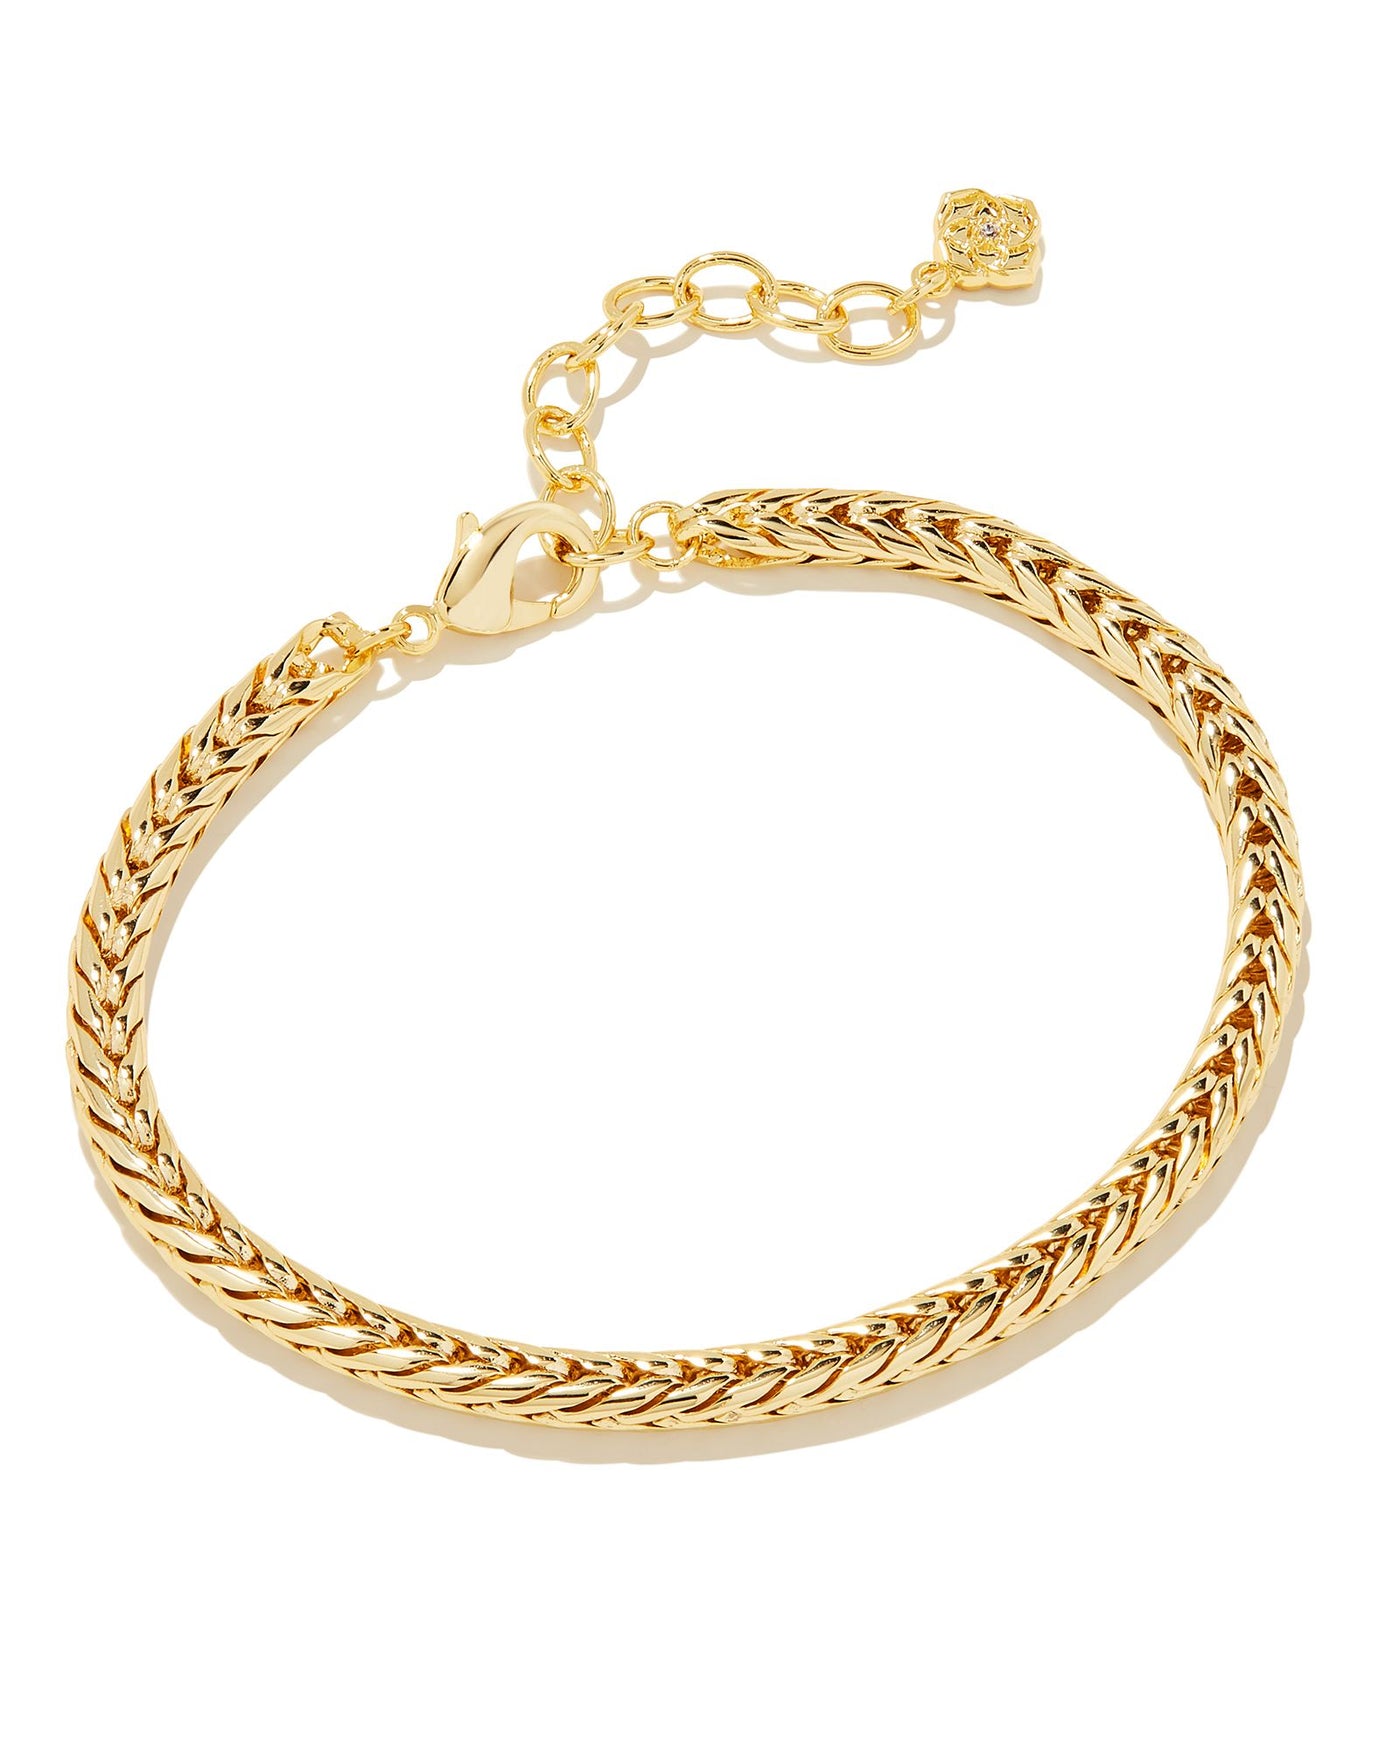 Kendra Scott Kinsley Chain Bracelets-Bracelets-Kendra Scott-Market Street Nest, Fashionable Clothing, Shoes and Home Décor Located in Mabank, TX